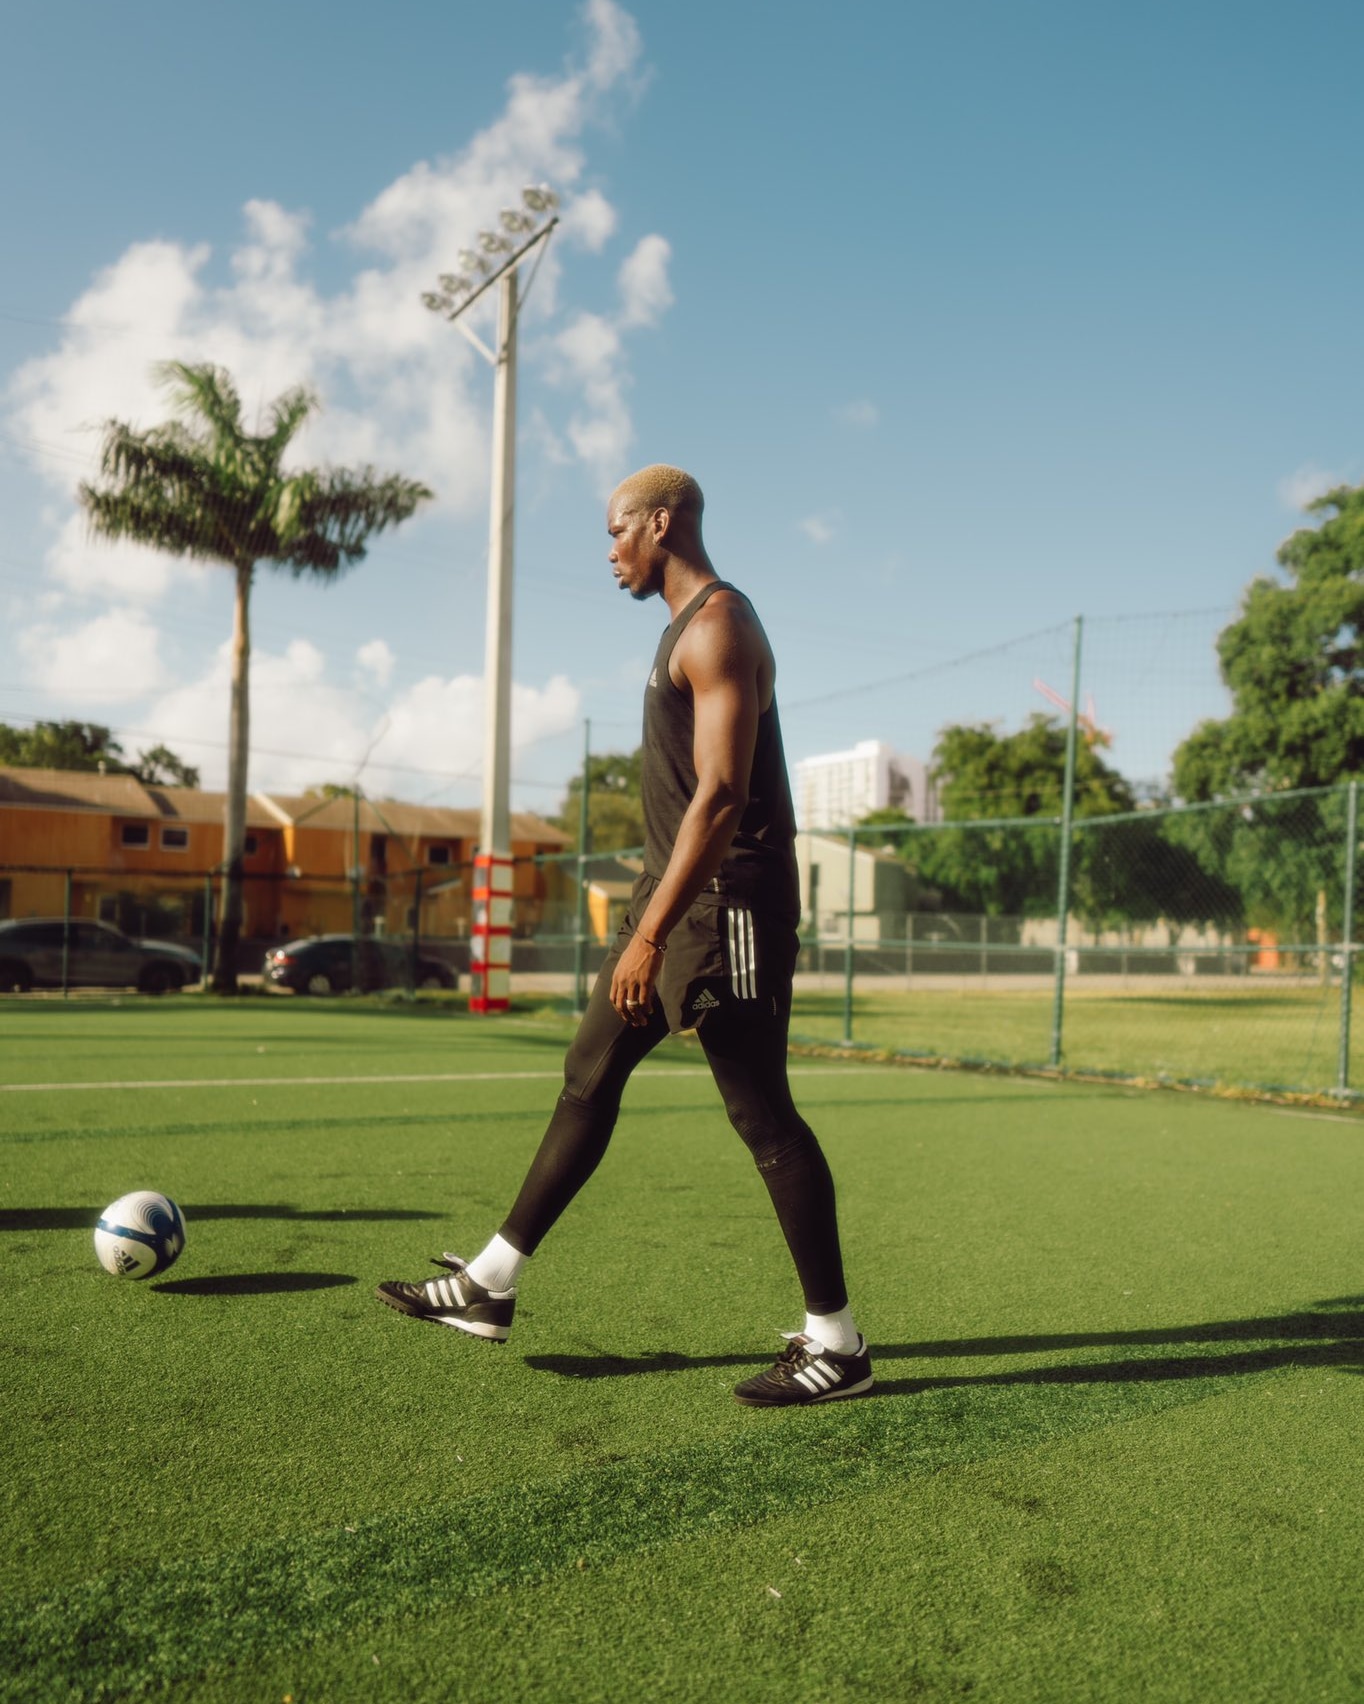 Pro:Direct Soccer on Twitter: "Pogba in the adidas Mundial Team Astro is a  pre-season flex 👀 https://t.co/oQMYx44Pb3" / Twitter